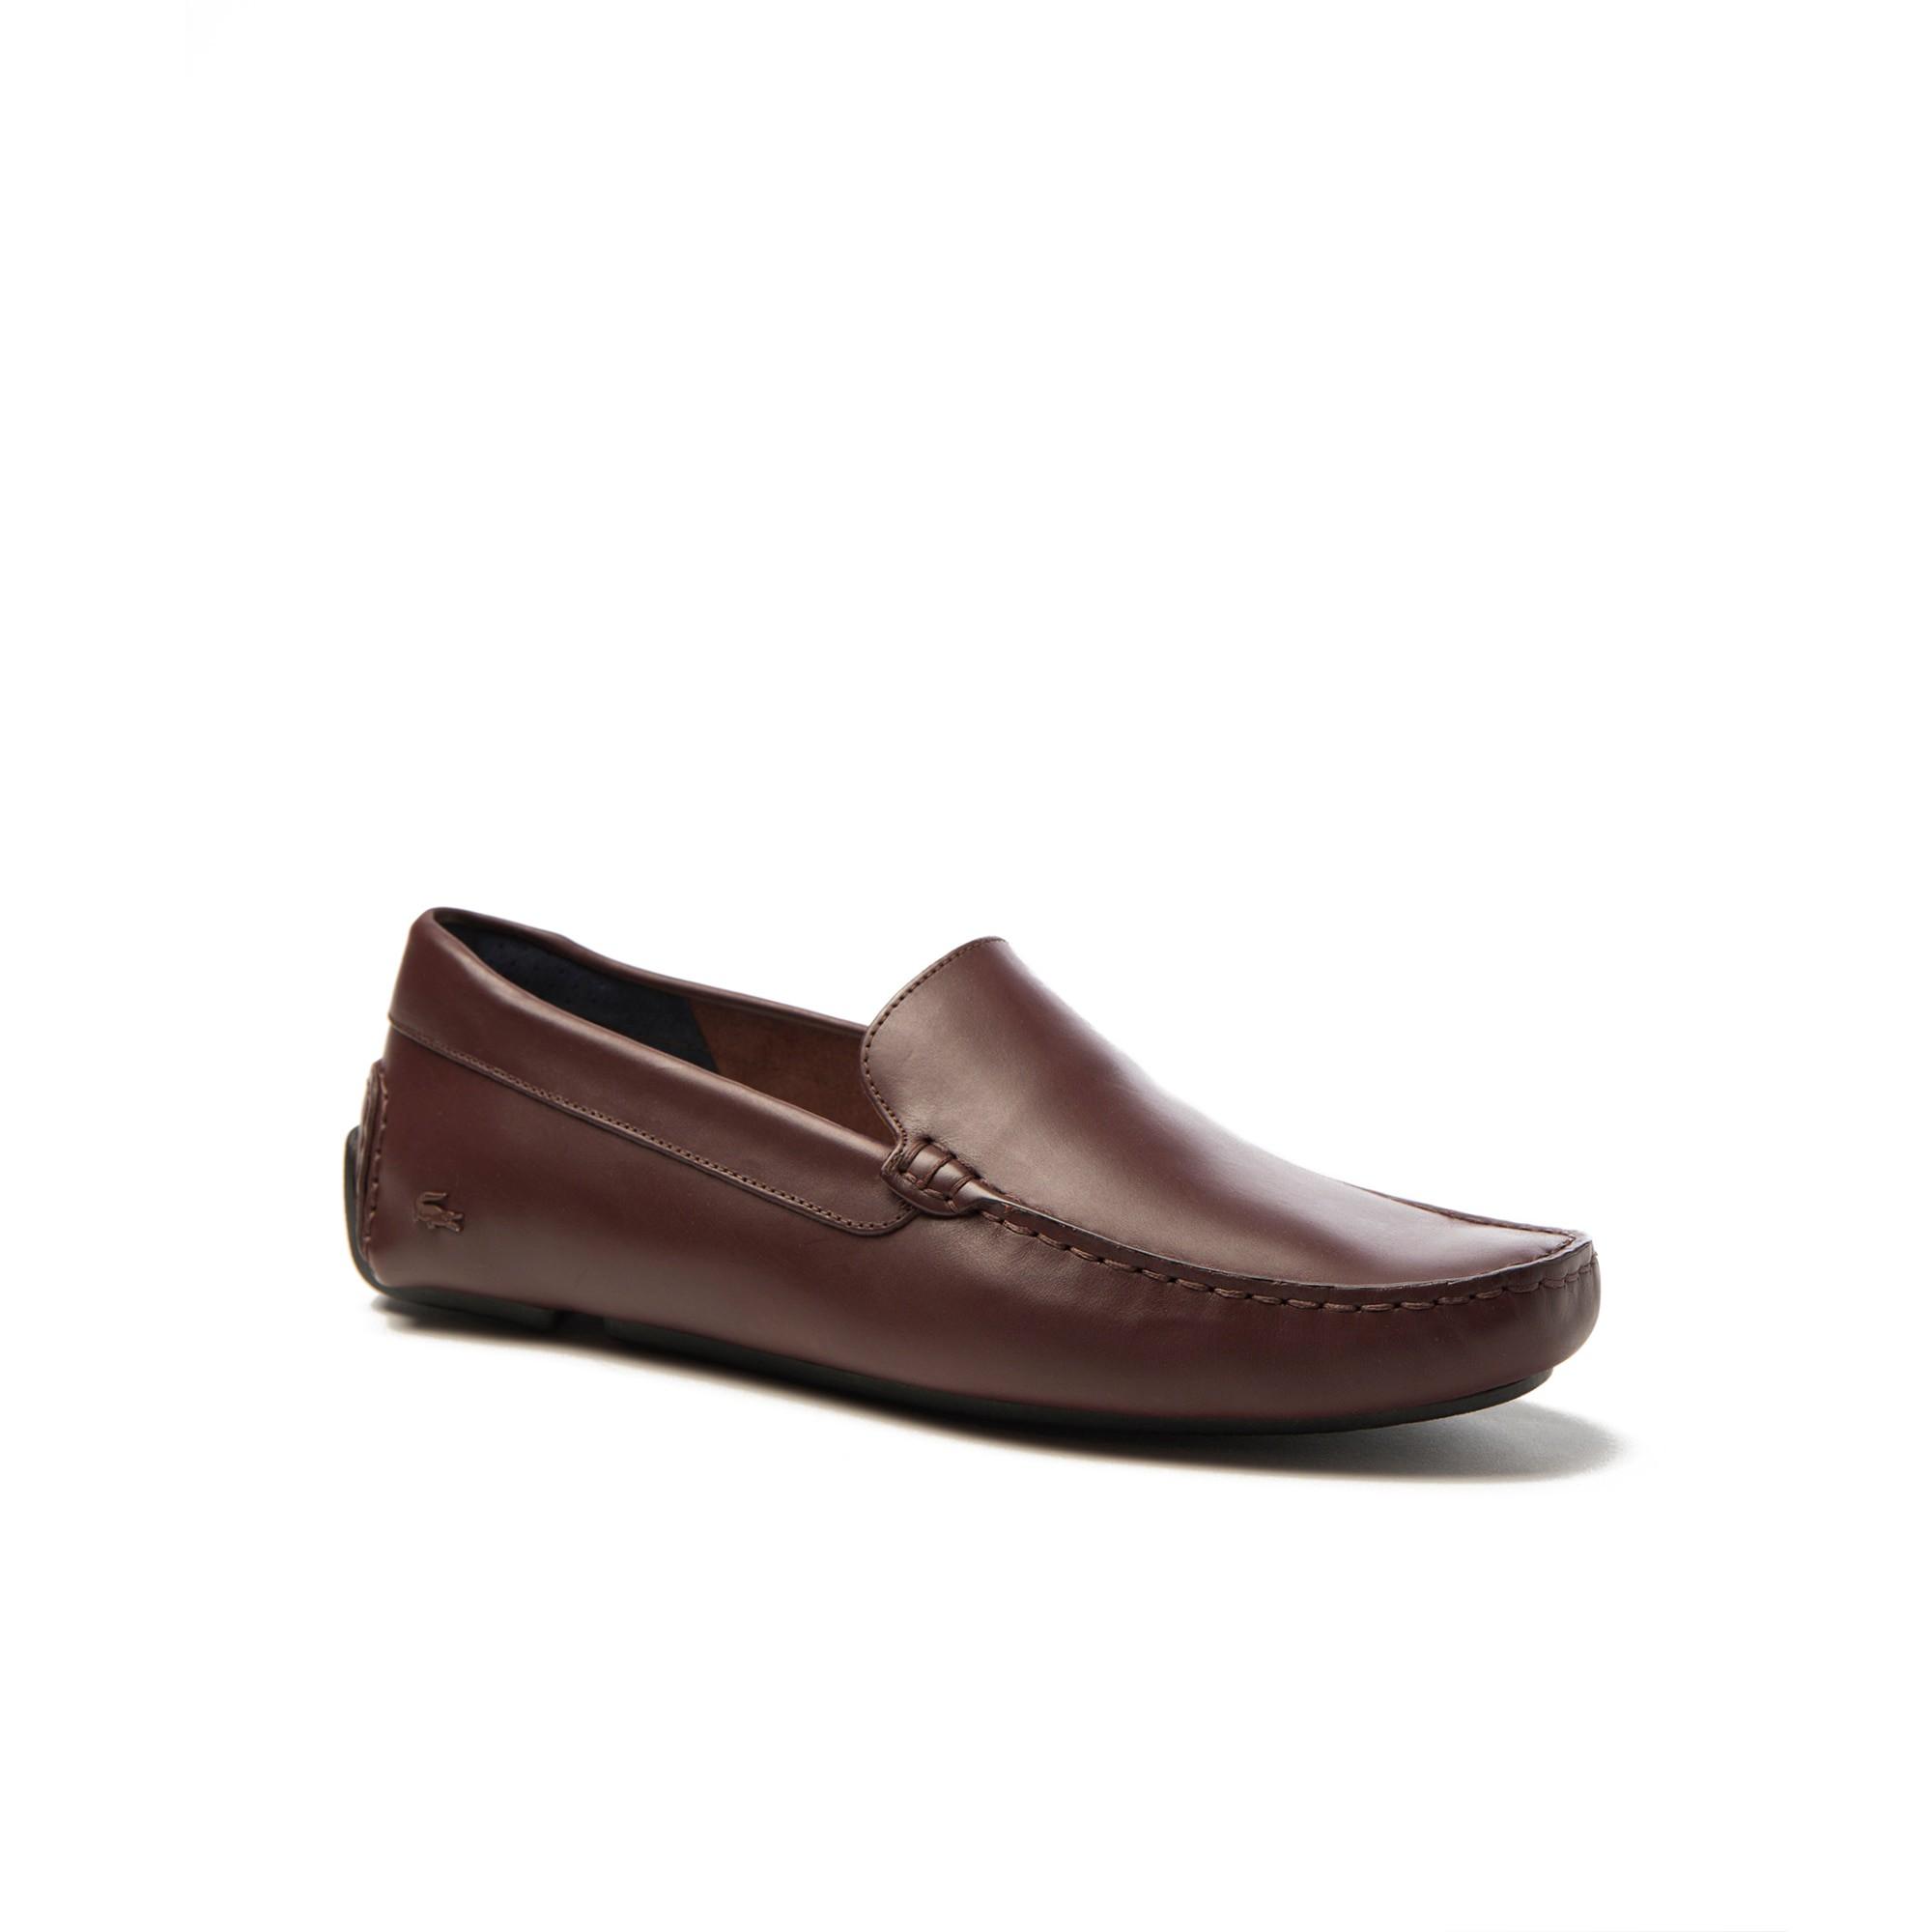 Lacoste Men's Piloter Leather Moccasins 